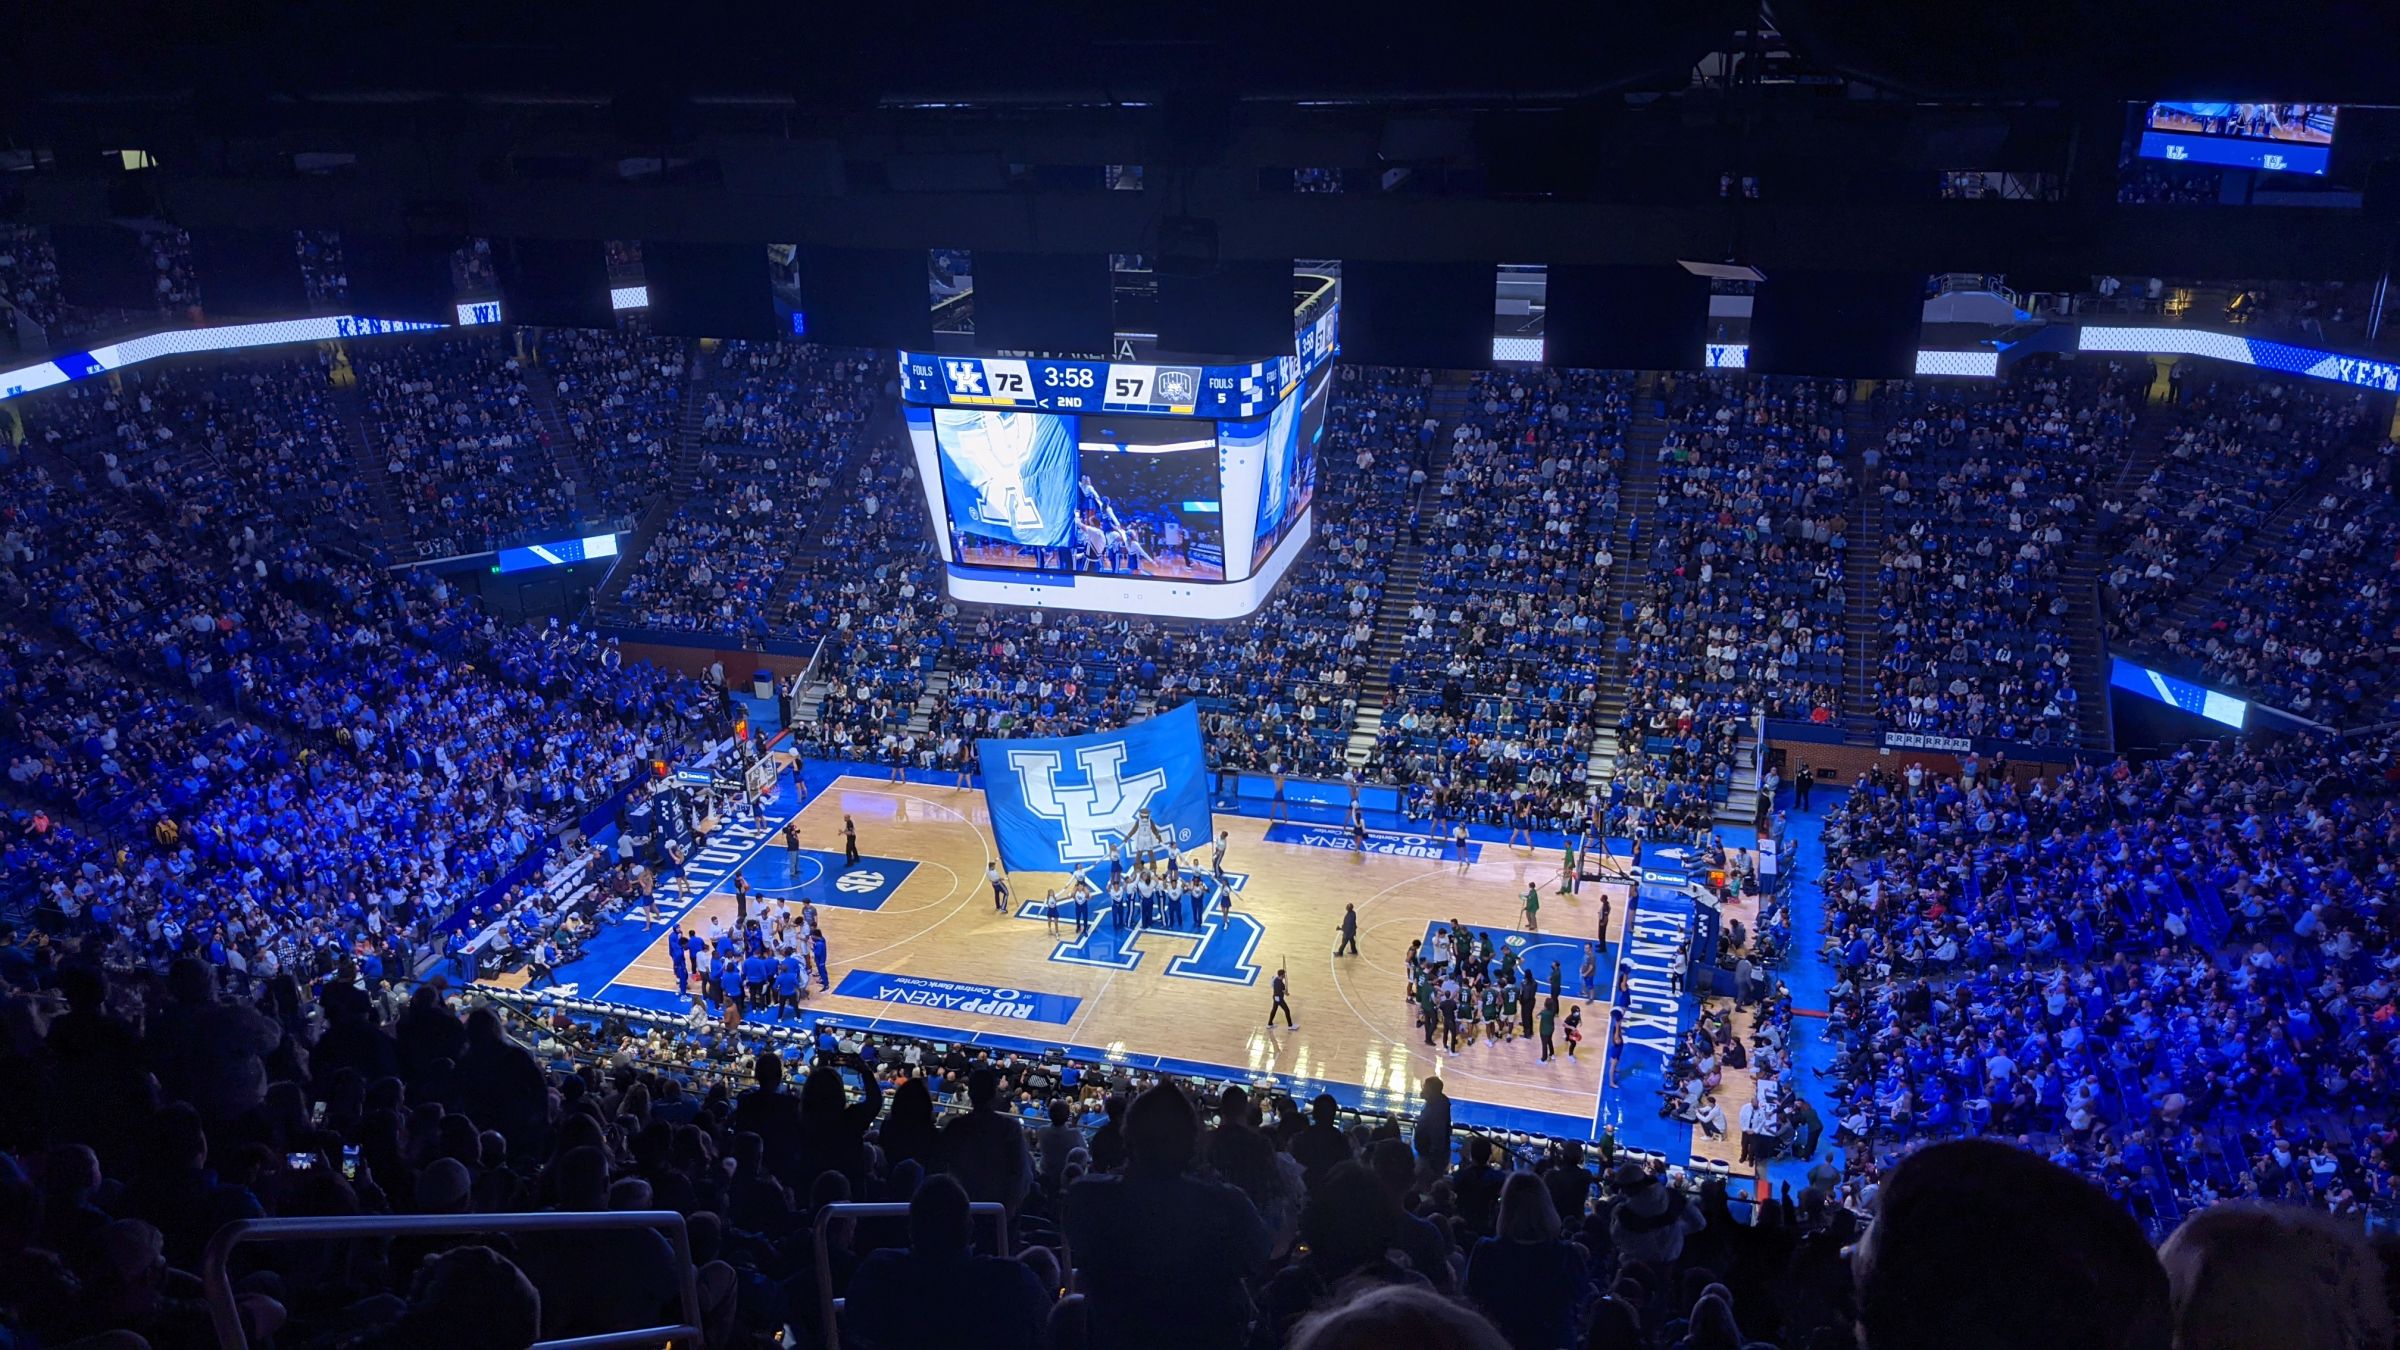 Section 230 at Rupp Arena